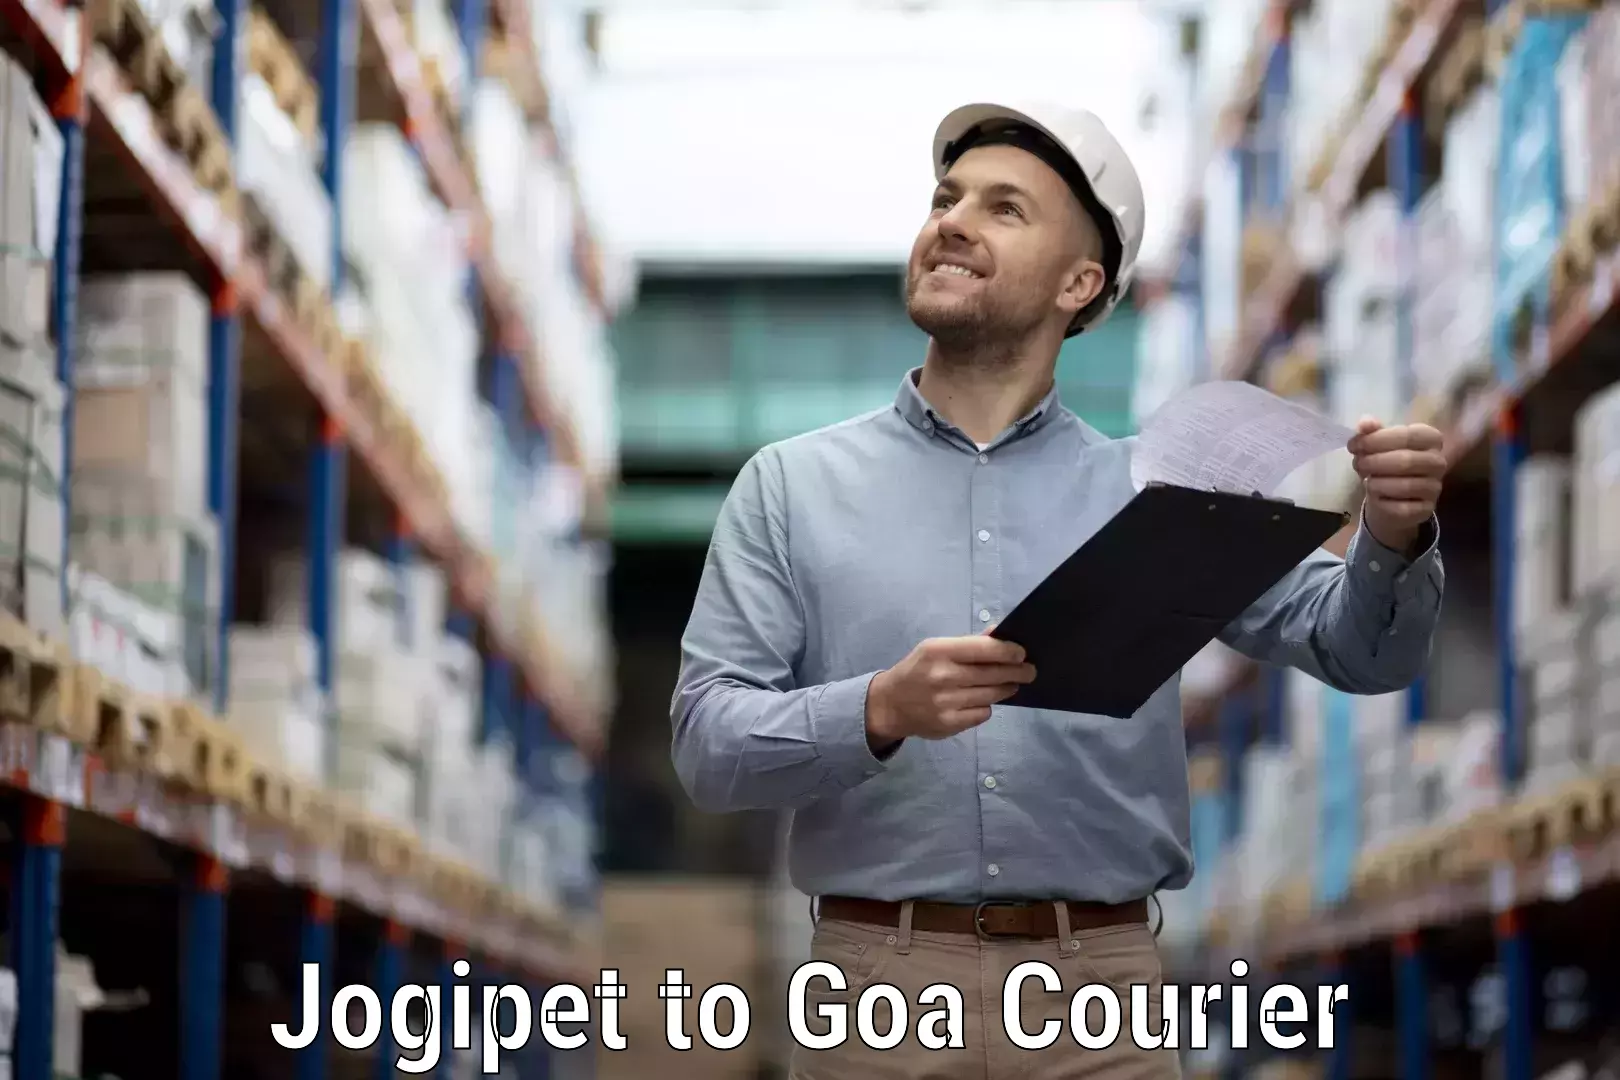 Professional courier handling Jogipet to Goa